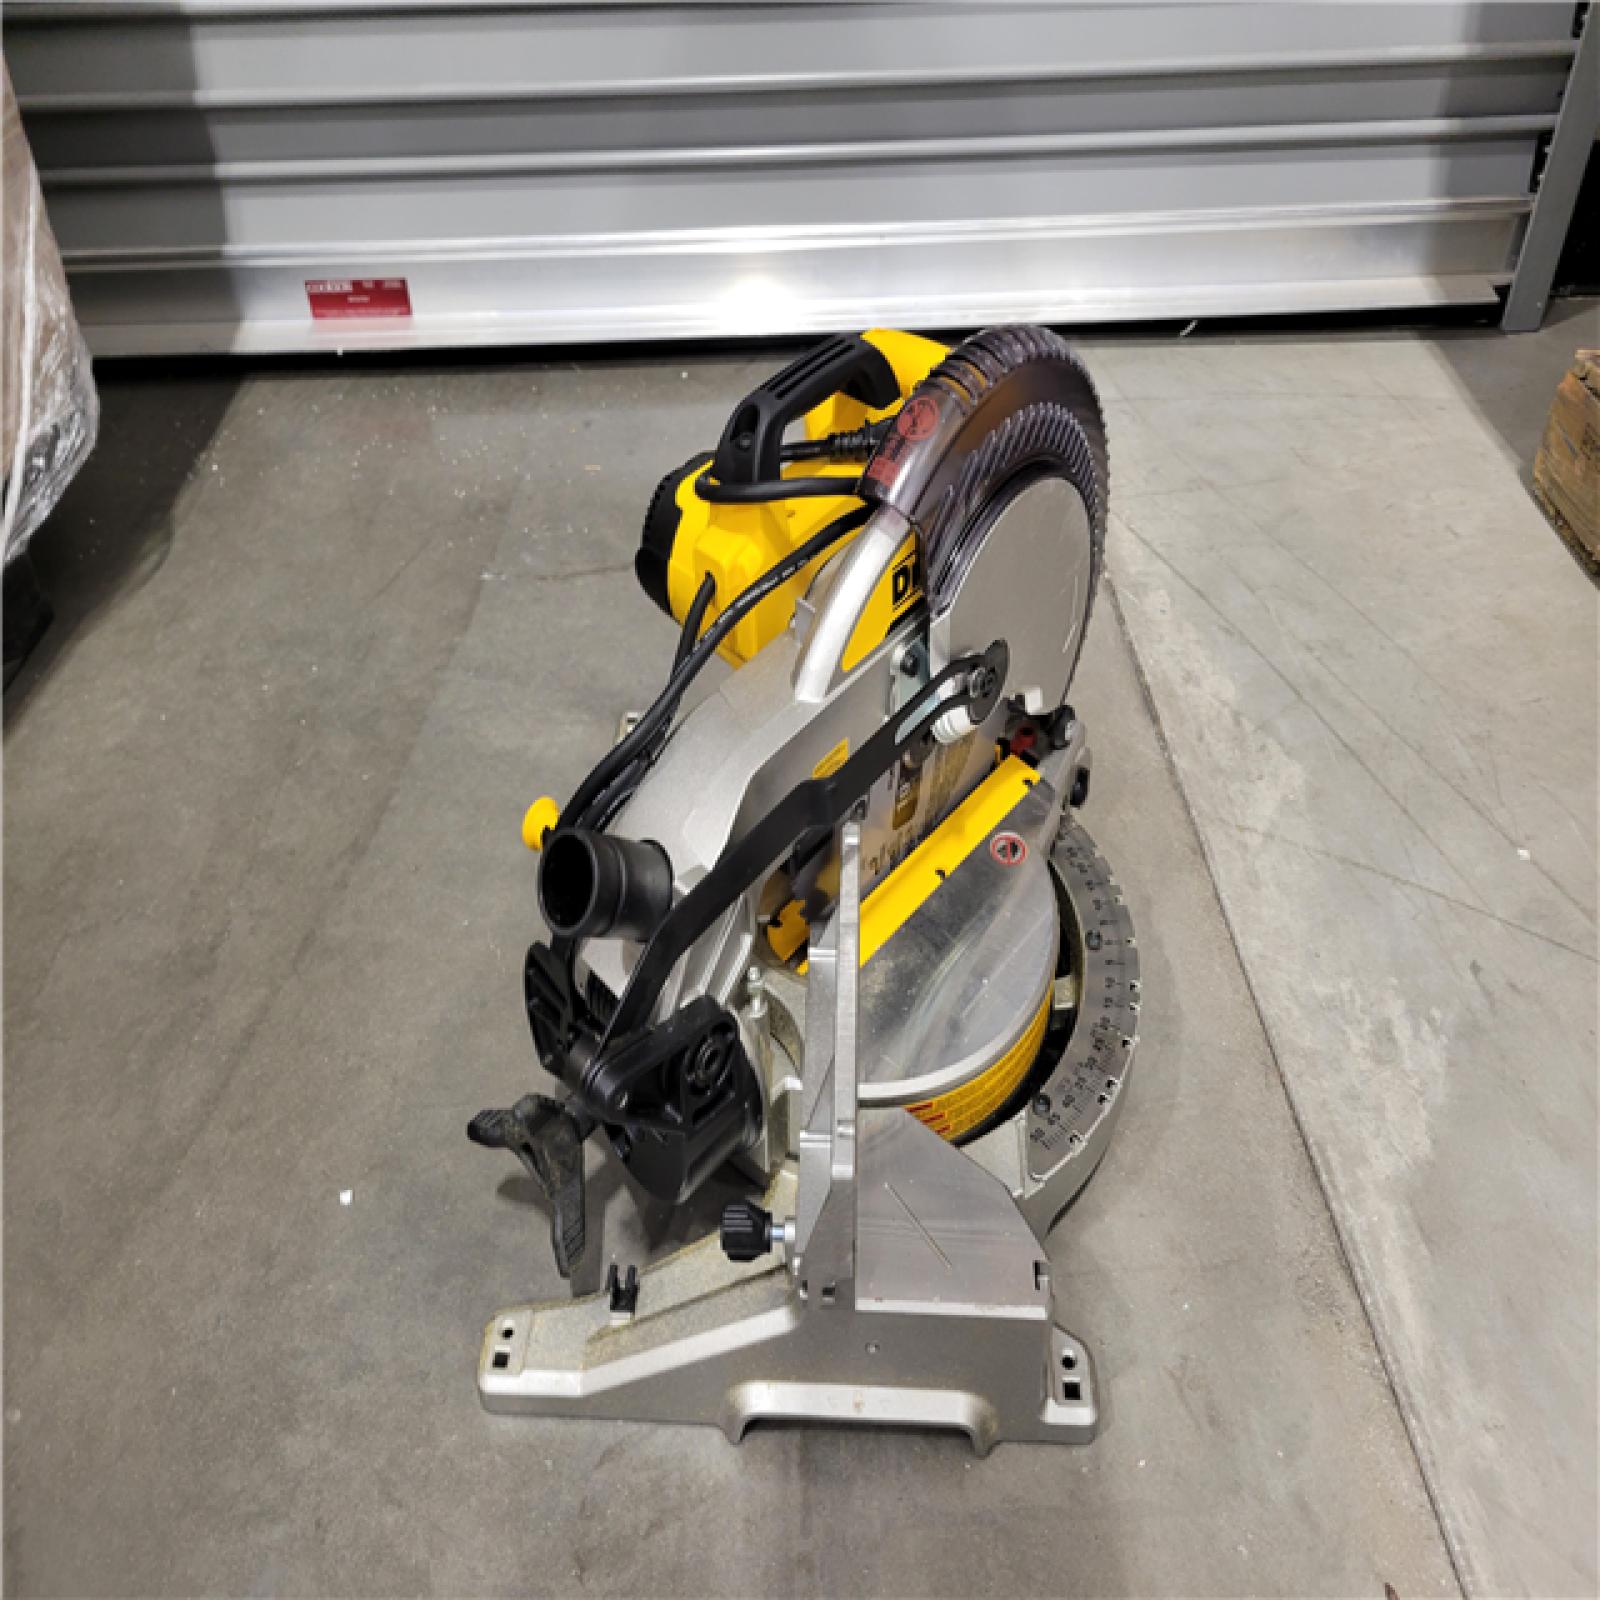 AS-IS DeWalt 15 Amps Corded 10 in. Single Bevel Compound Miter Saw